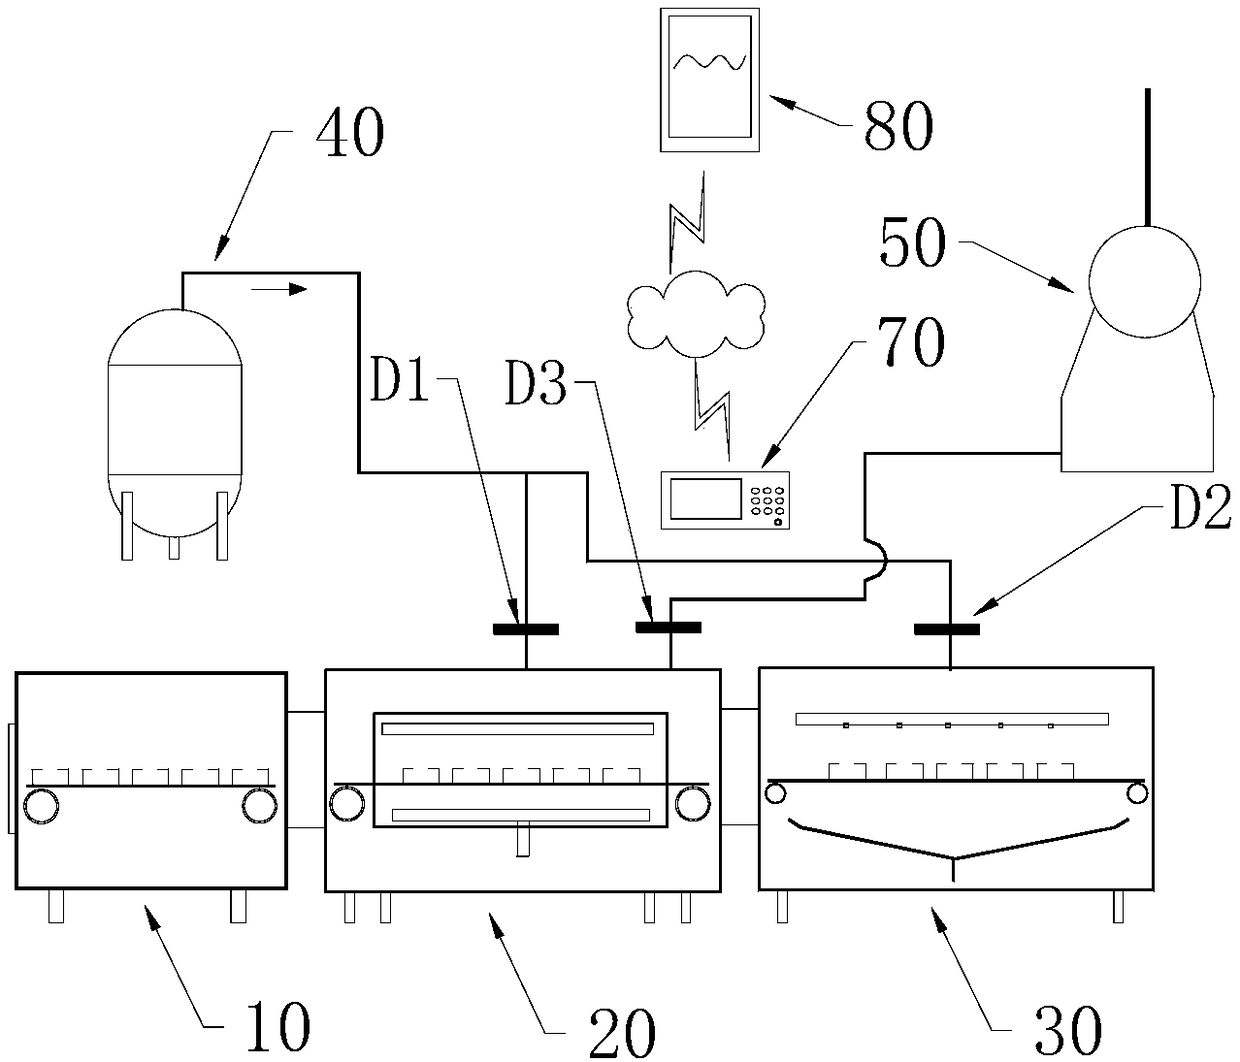 Food intelligent vacuum baking system based on operation and control of Internet of Things